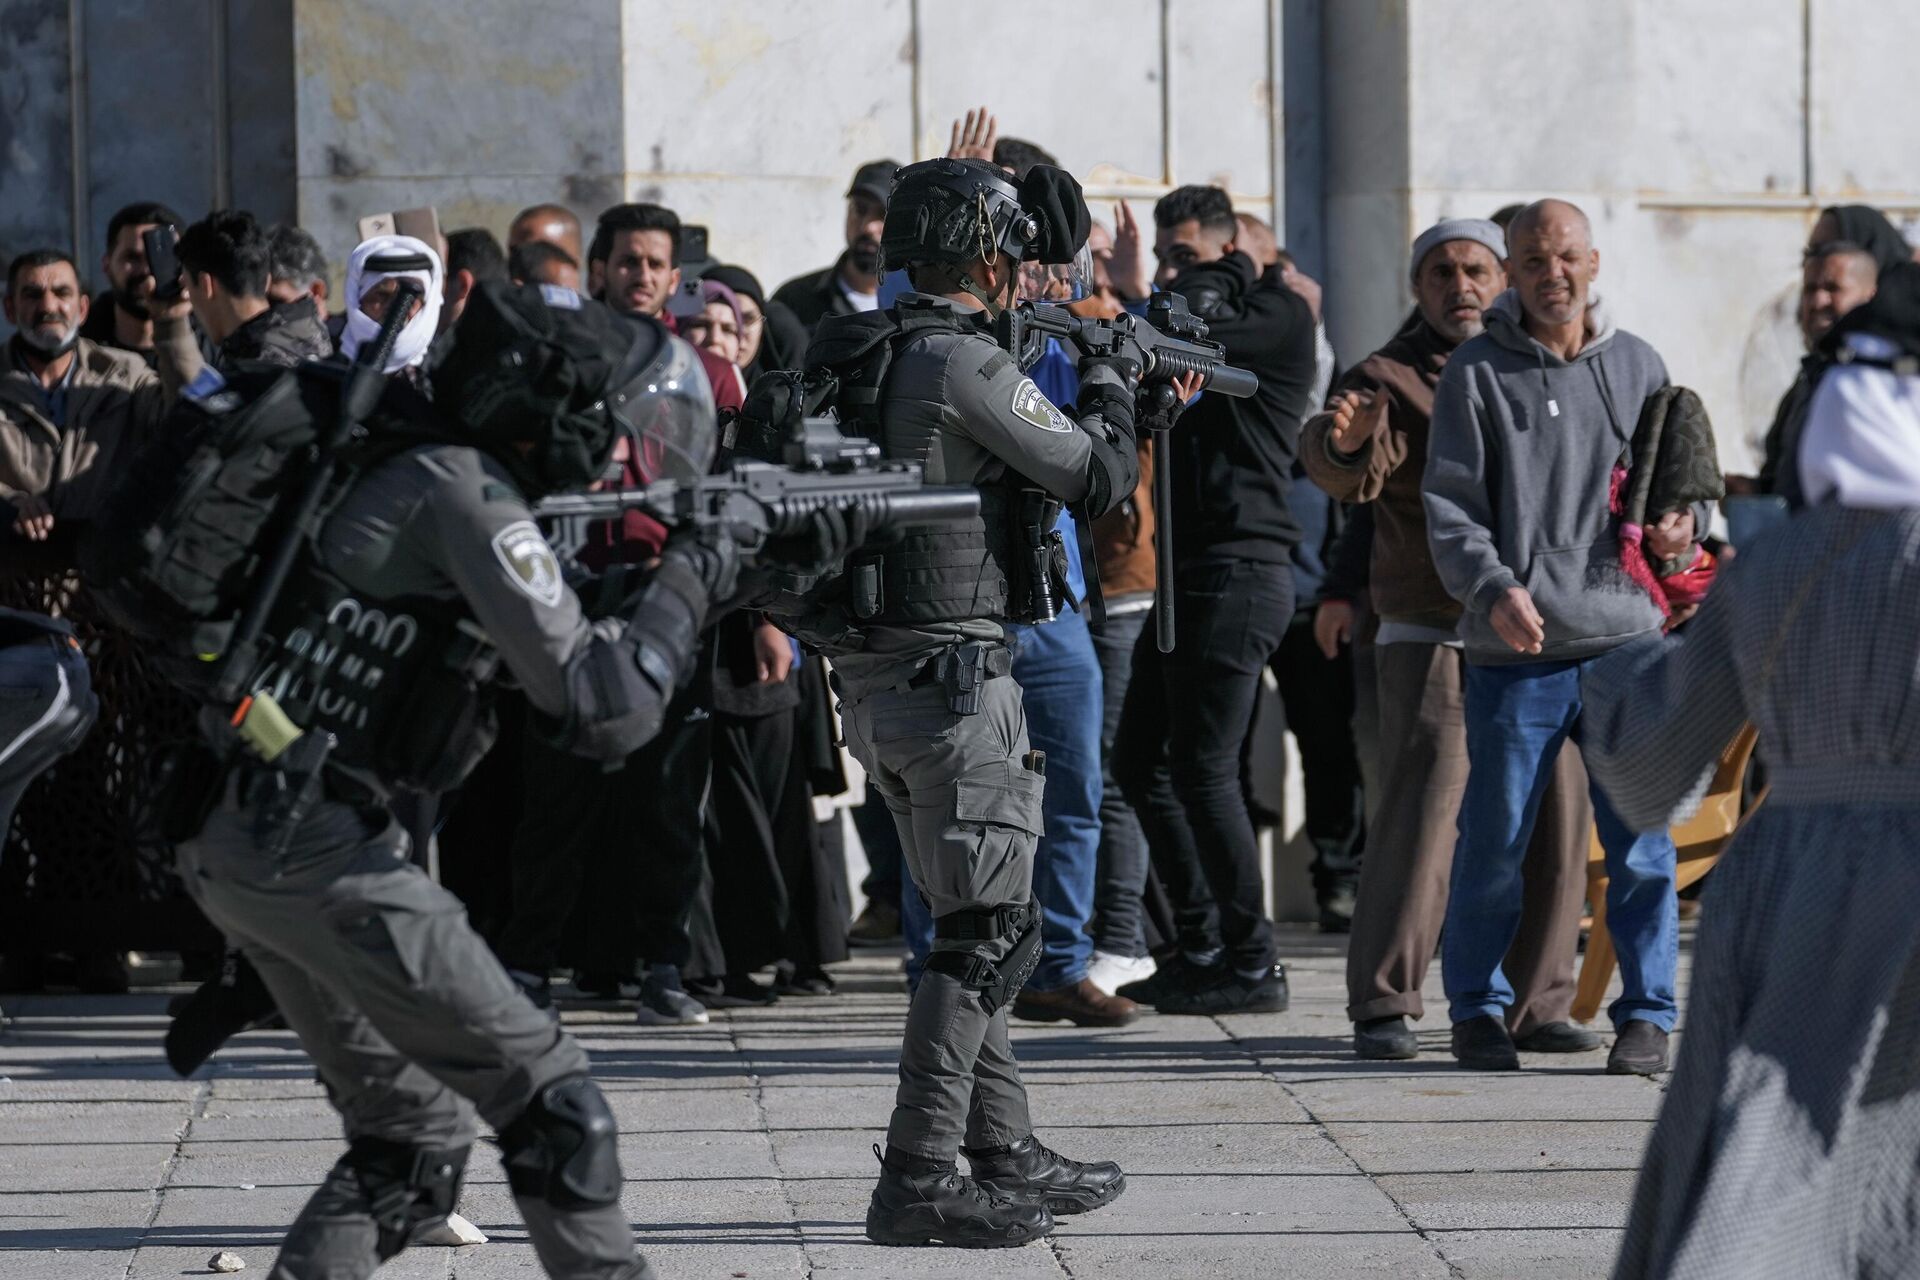 Israeli security forces take position during clashes with Palestinians demonstrators at the Al Aqsa Mosque compound in Jerusalem's Old City, Friday, April 15, 2022. - Sputnik International, 1920, 18.04.2022